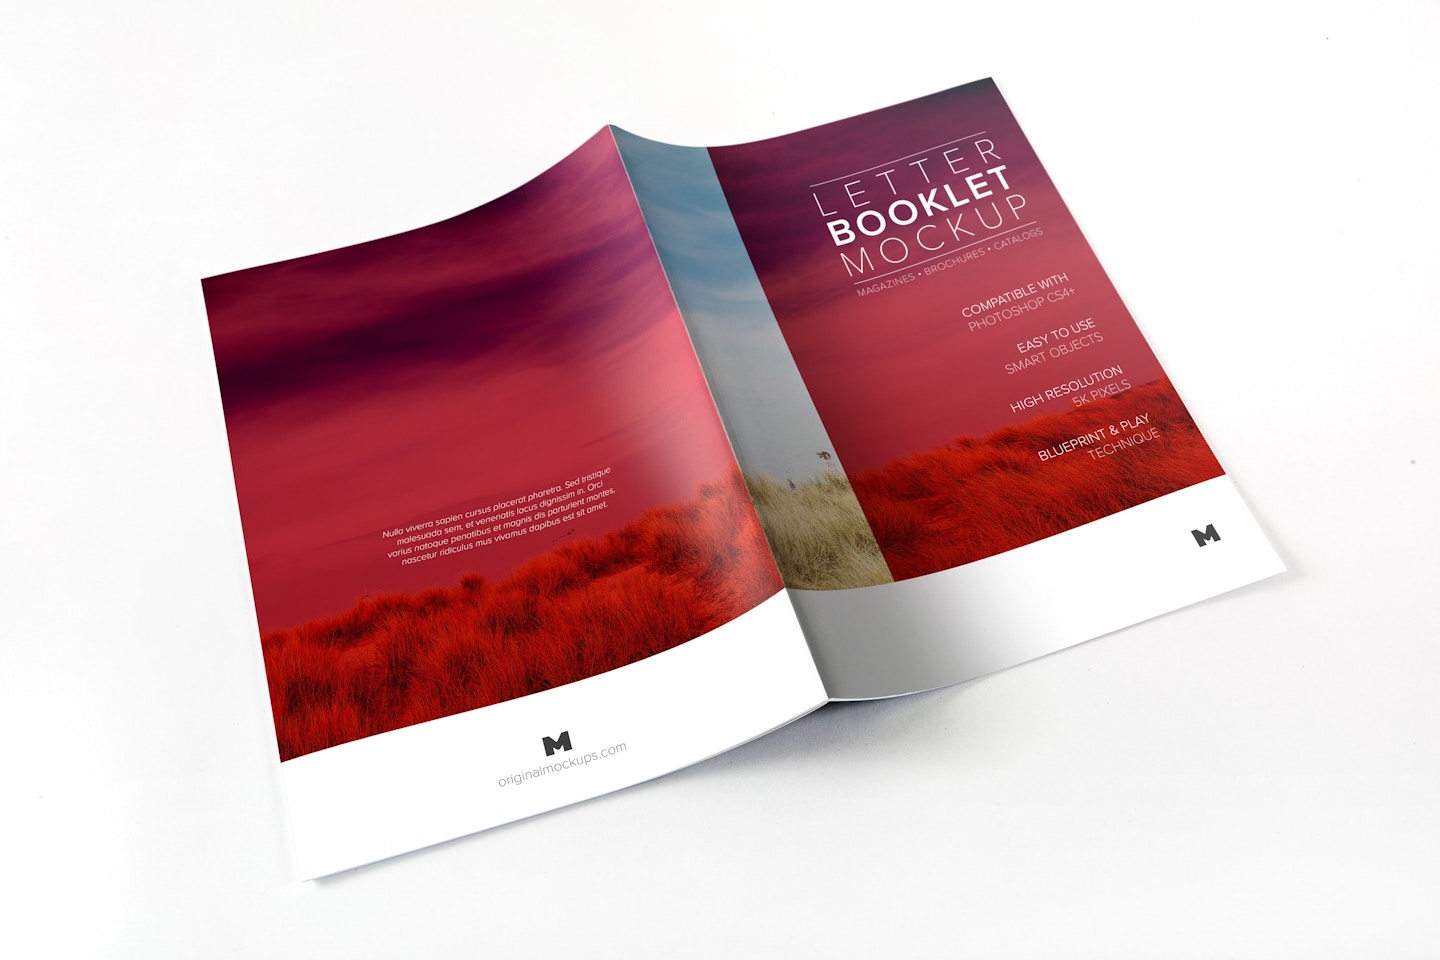 Letter Booklet Spreads Covers Mockup 01